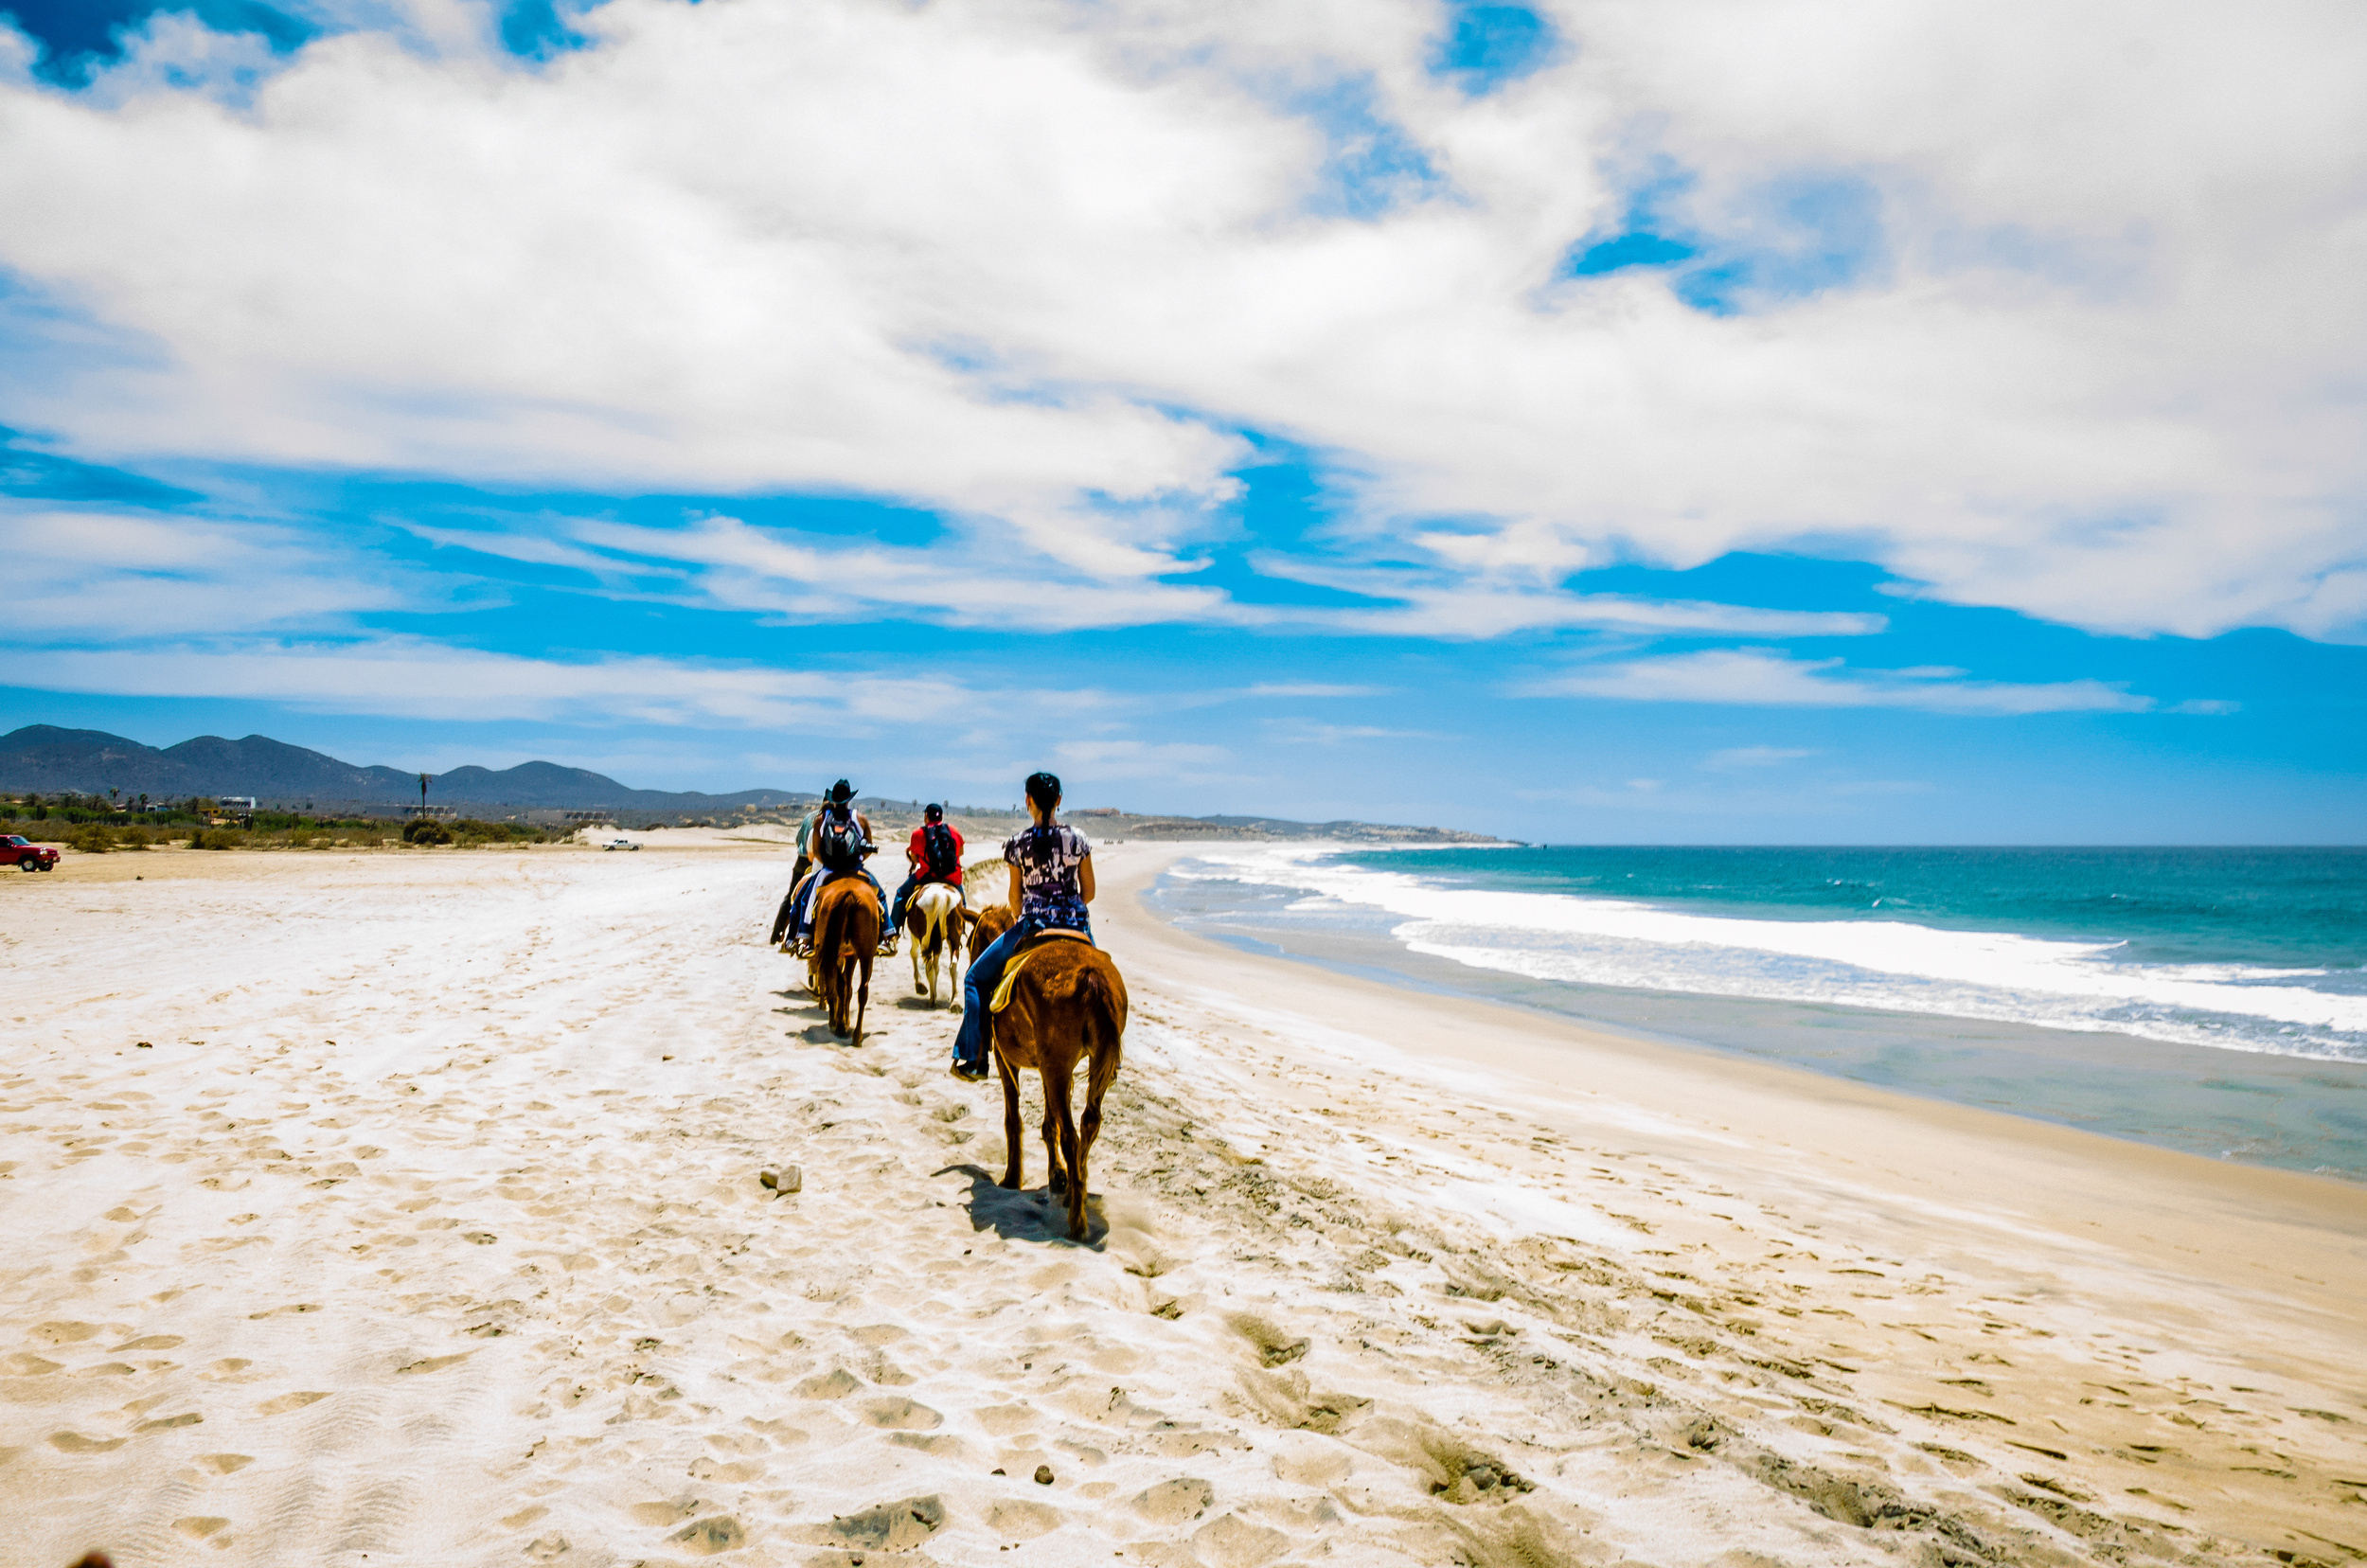 <p>The Baja Peninsula is the stuff of vacation dreams, with long sandy stretches against the vibrant blue ocean. However, if you’ve tired of sunbathing or swimming, there’s nothing more fun than a canter along the beach, and plenty of outfits welcome tourists in Baja.</p><p>You may also like: <a href='https://www.yardbarker.com/lifestyle/articles/21_low_carb_slow_cooker_recipes_040824/s1__39121634'>21 low-carb slow cooker recipes</a></p>